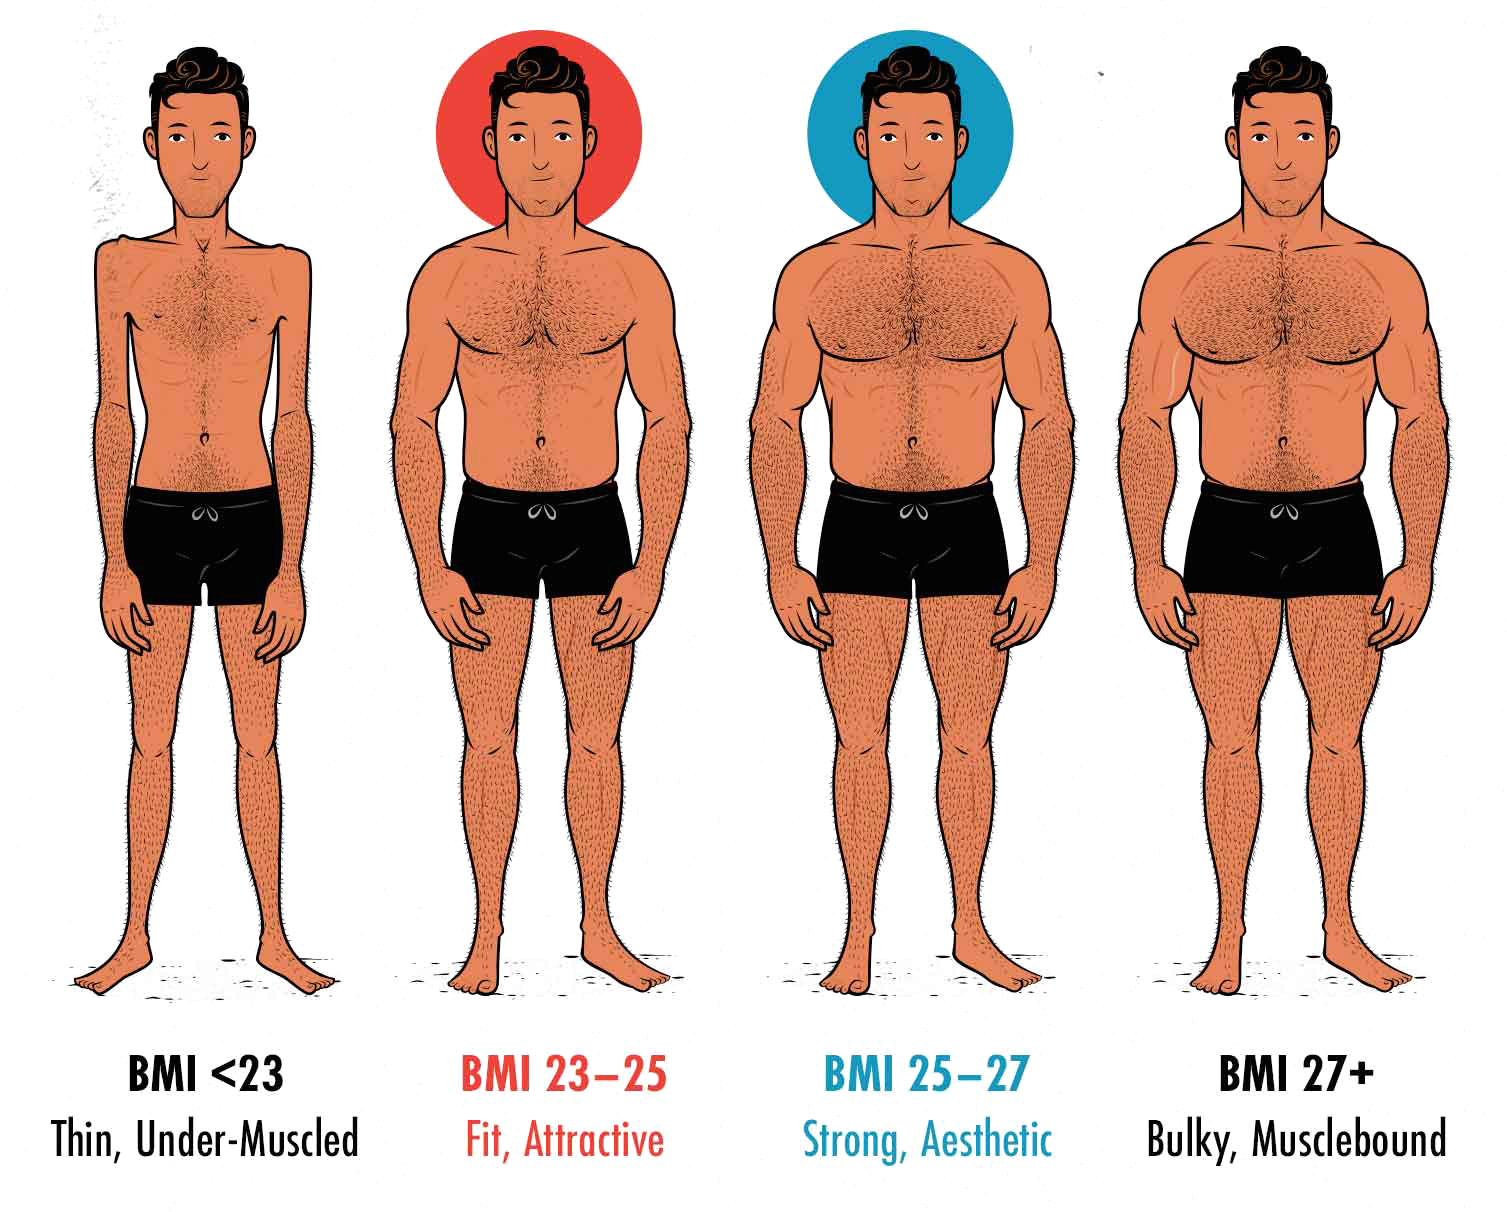 Diagram showing the most attractive and aesthetic male body weights and BMIs.